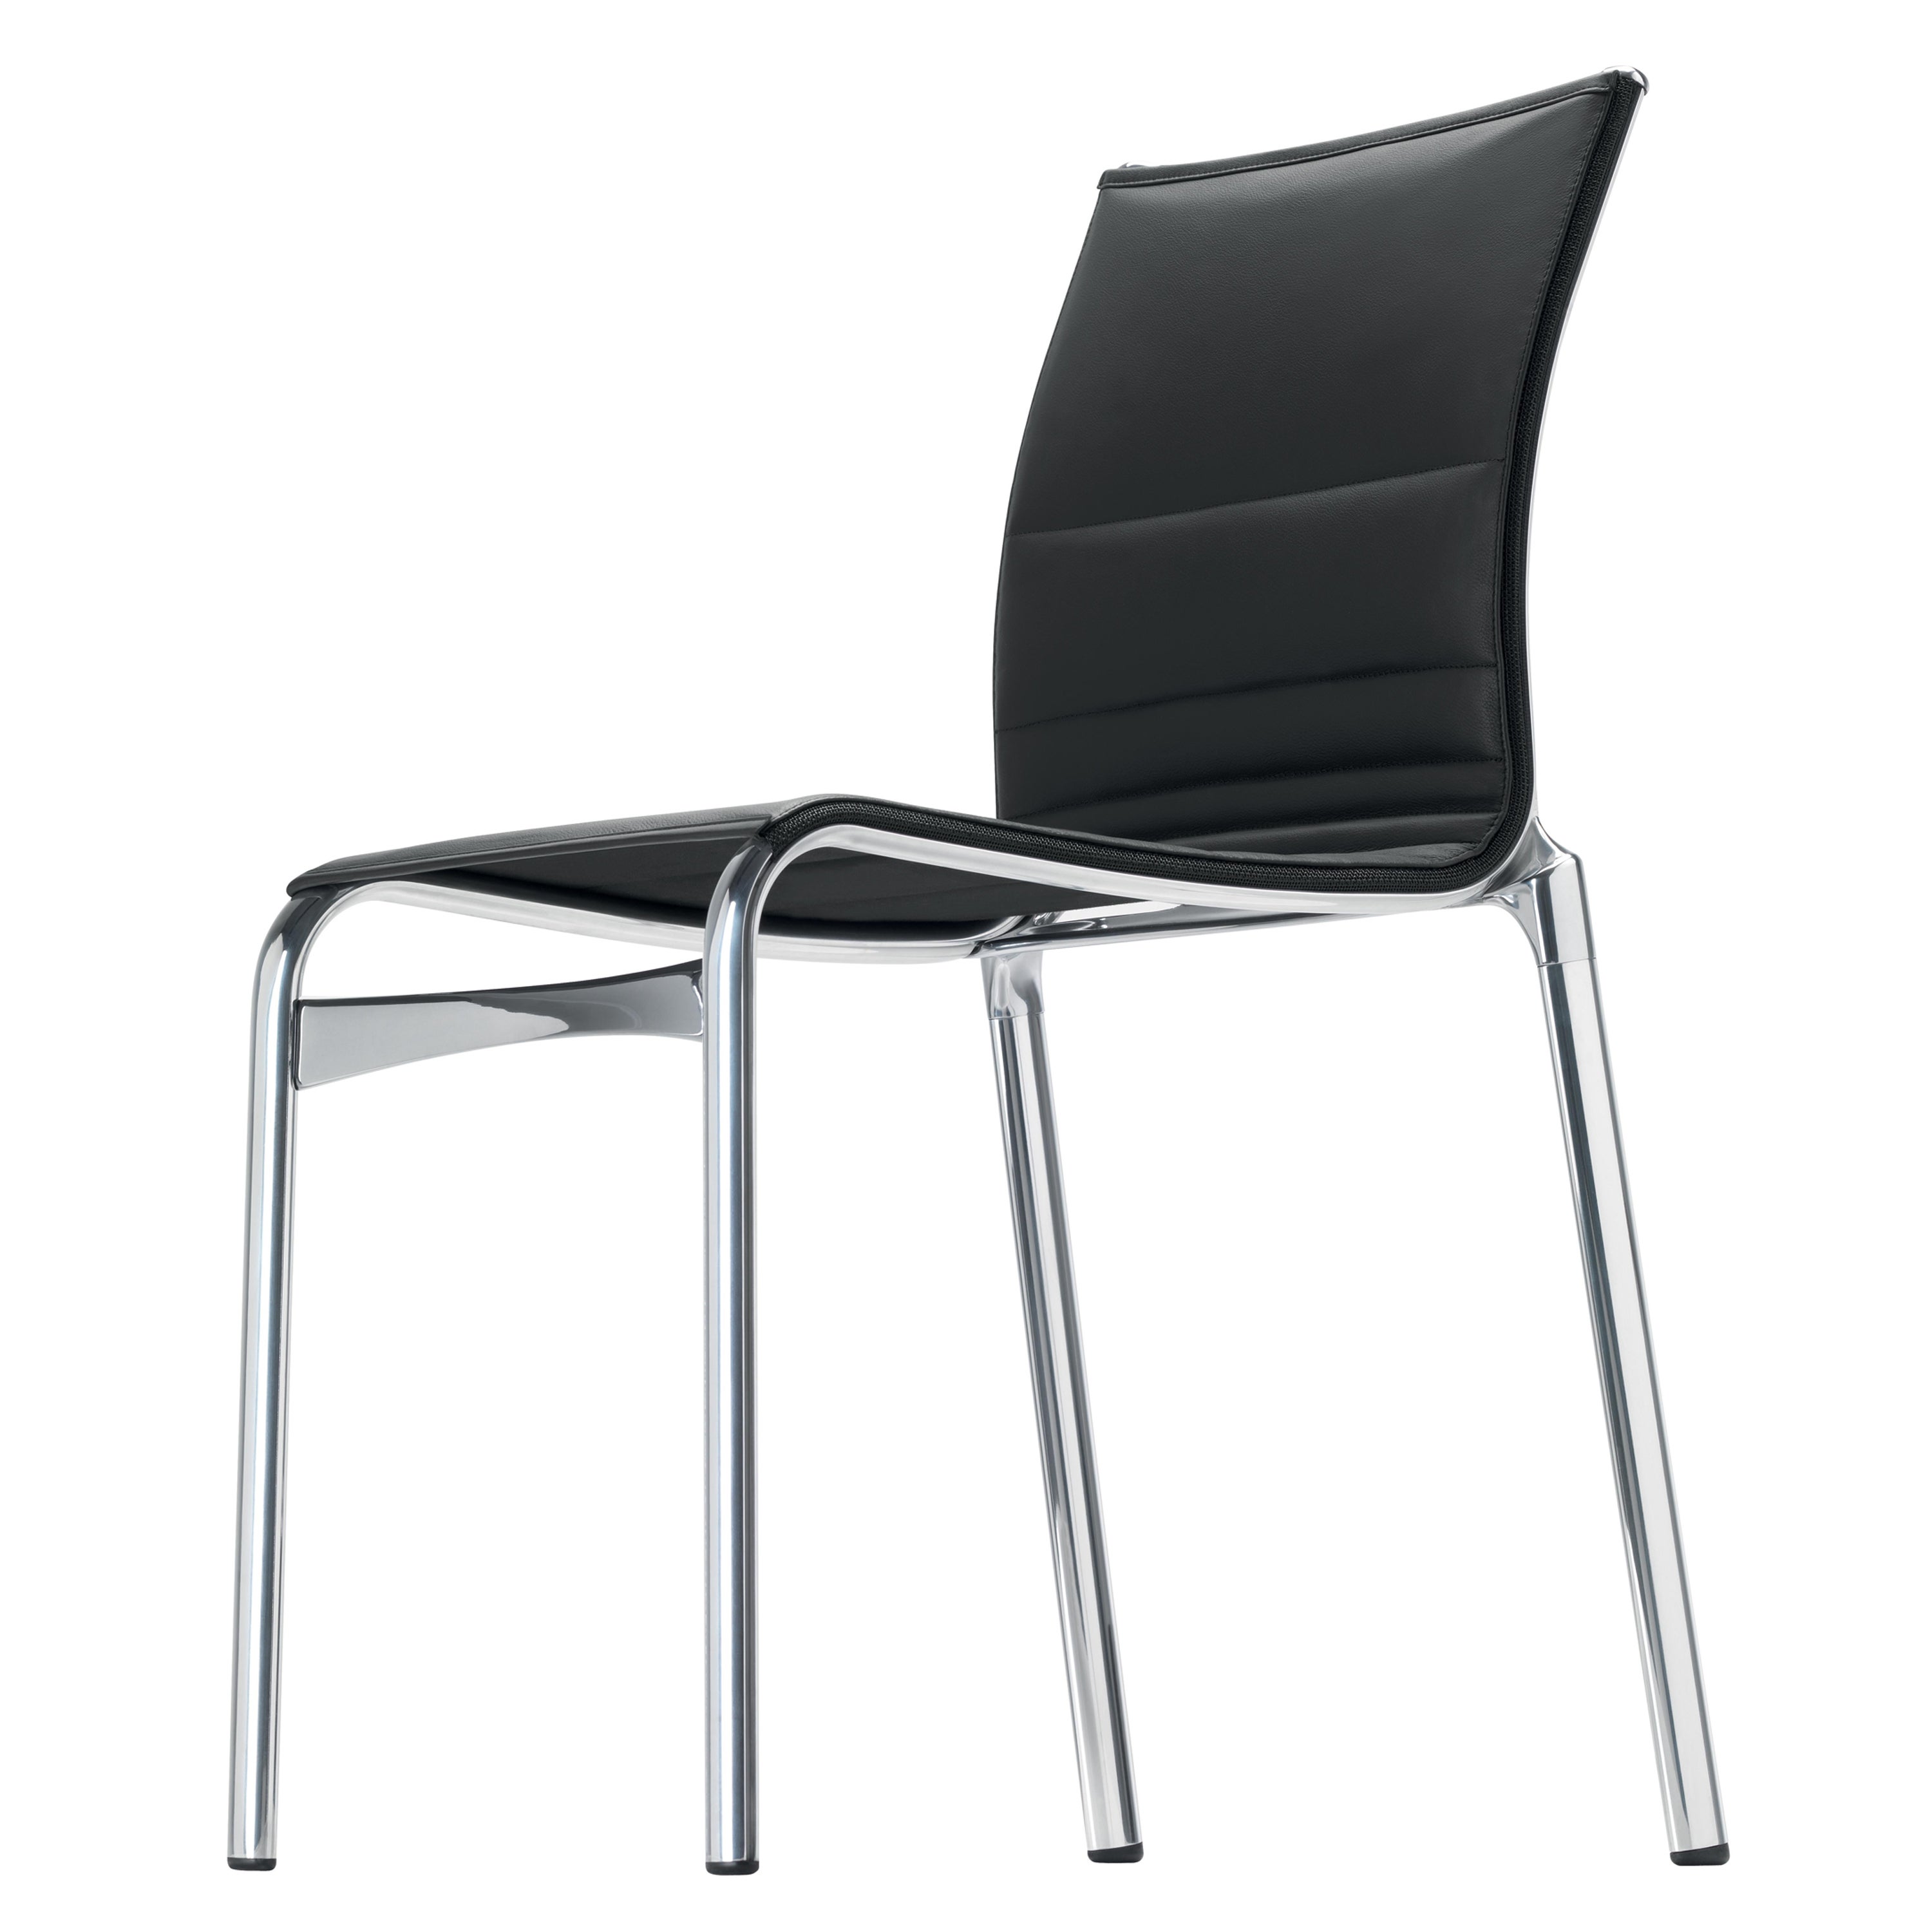 Alias Bigframe 44 Chair in Black Leather Upholstery with Chromed Aluminium Frame For Sale